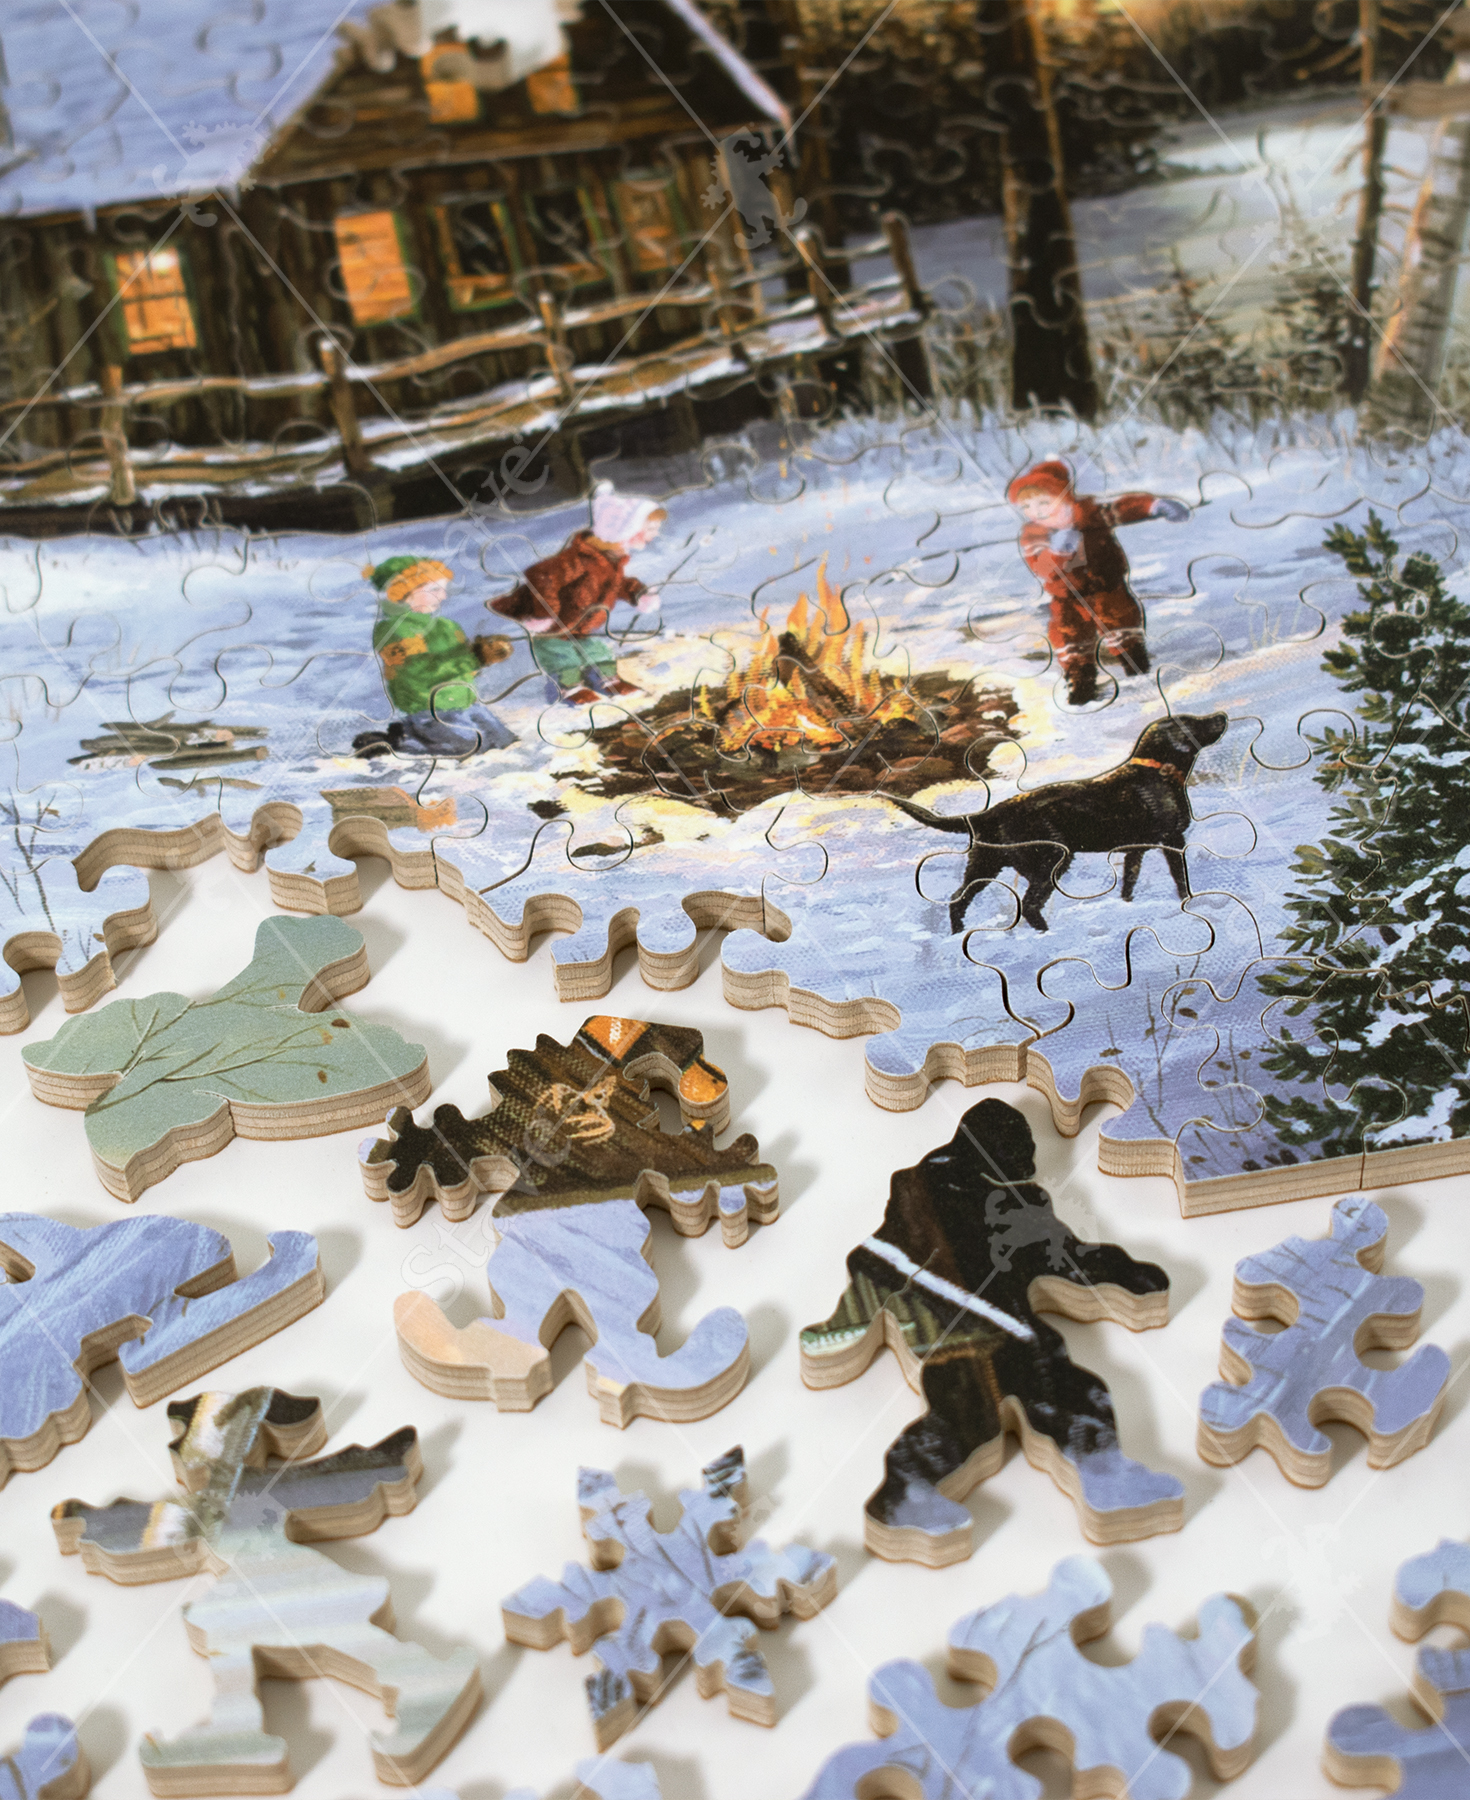 Taken apart puzzle pieces from Homeward Bound wooden jigsaw puzzle capturing a winter scene of a cabin in the woods by a frozen lake, where three children and their dog are roasting marshmallows by a campfire on a cold evening.